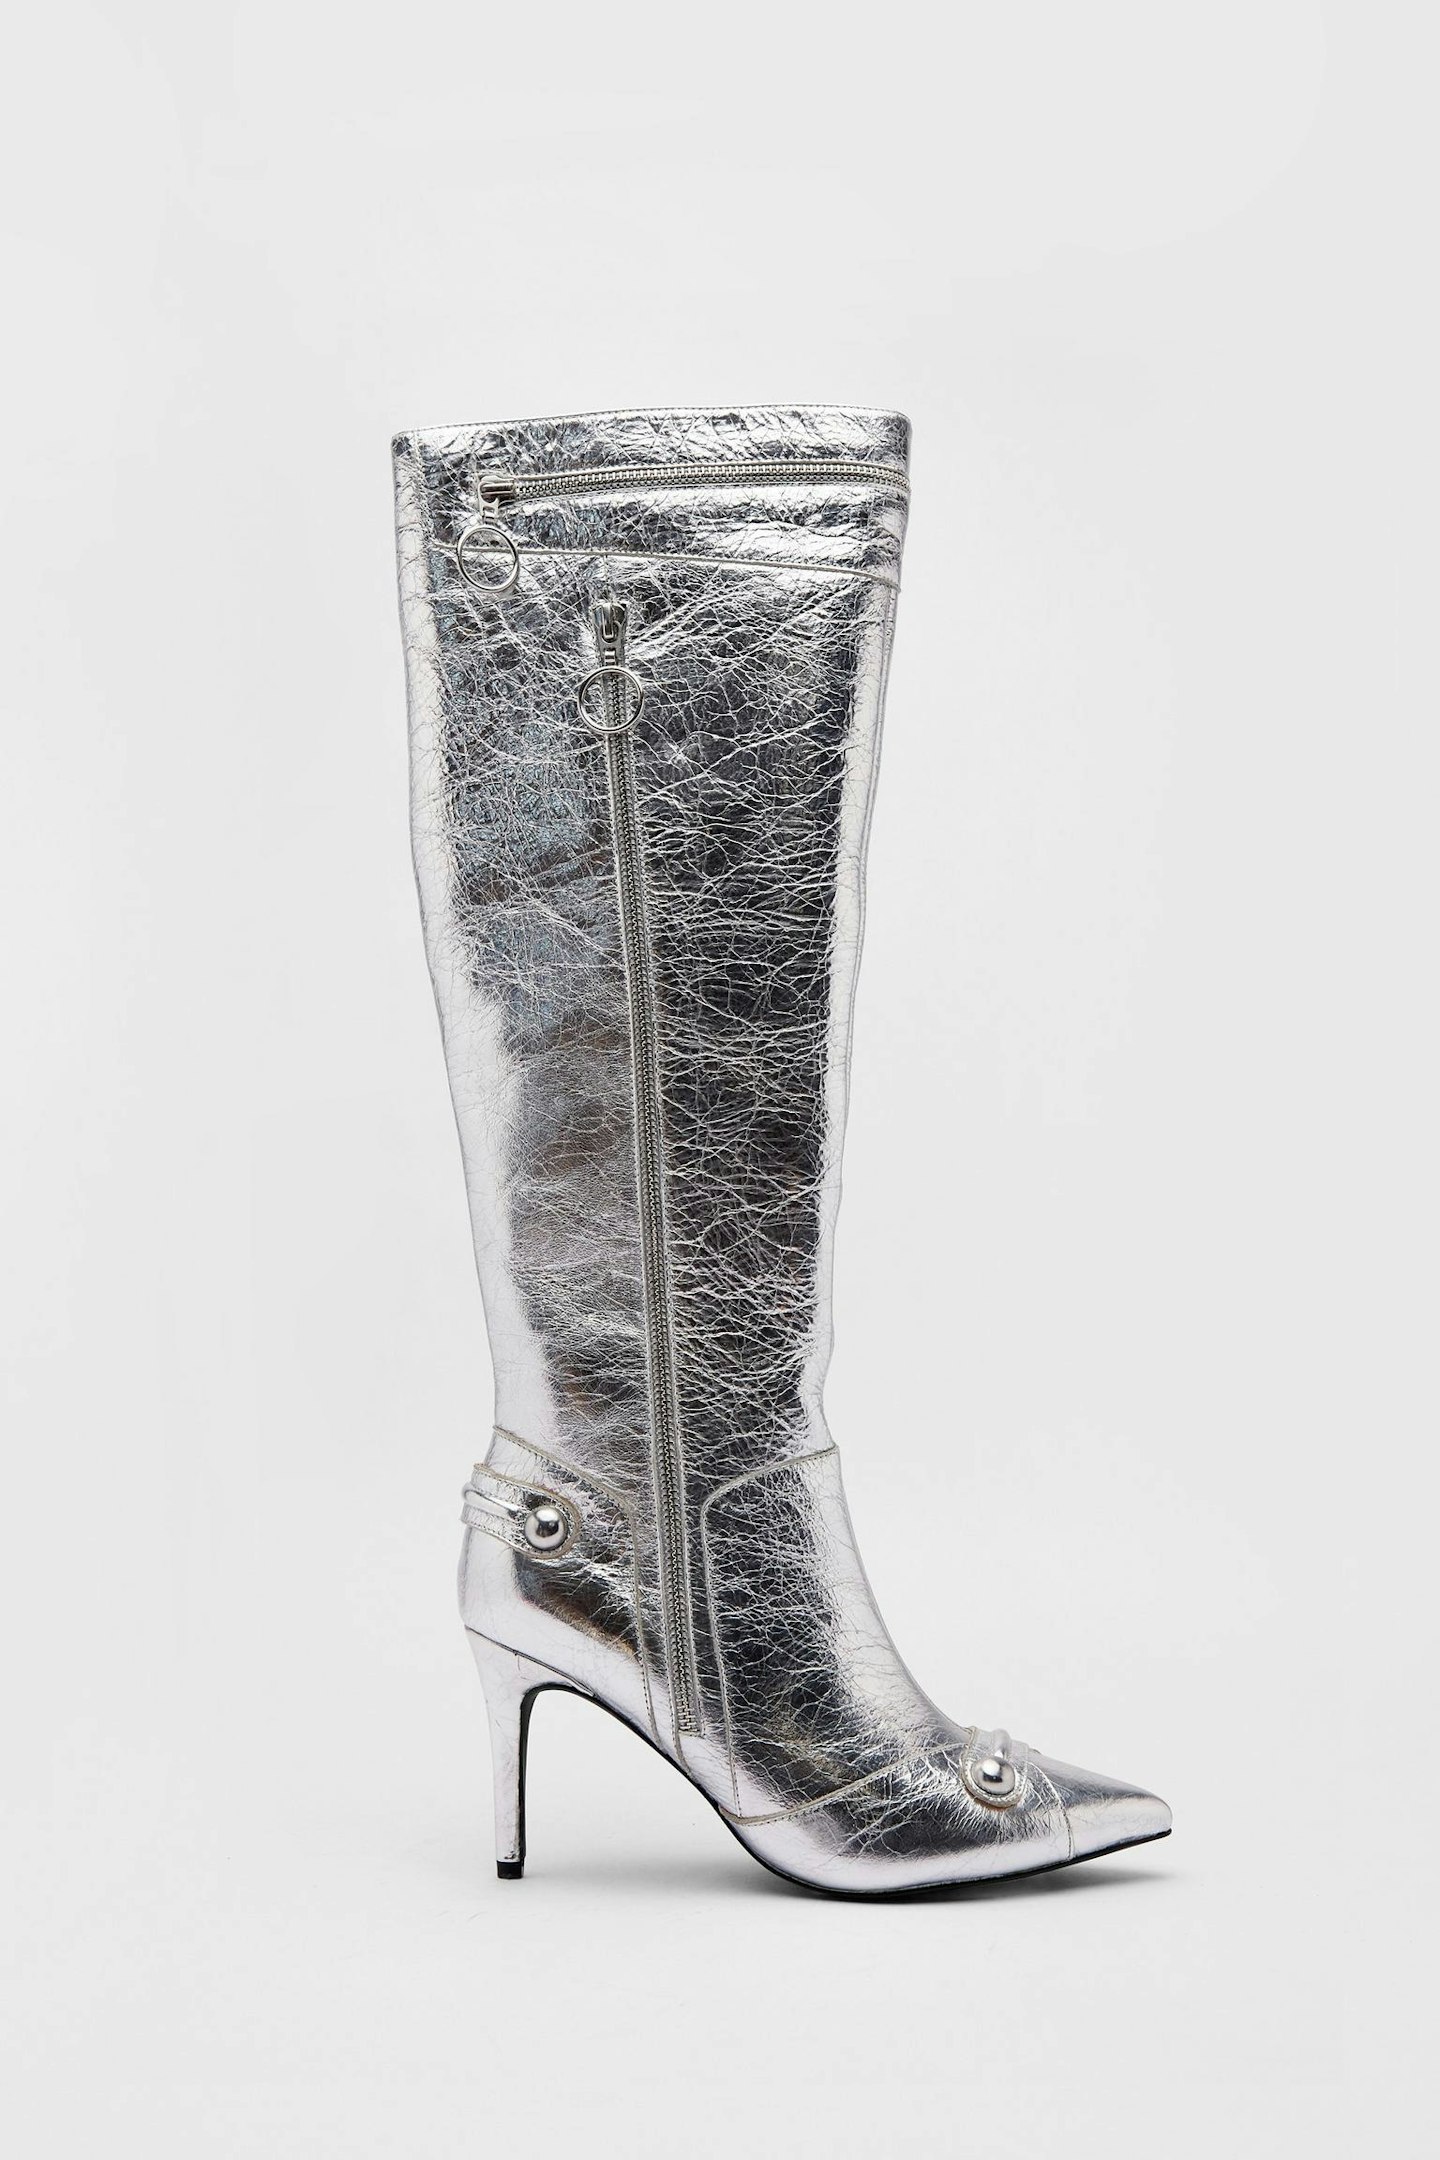 Warehouse, Leather Metallic Zip & Stud Pointed Toe Knee-High Boots